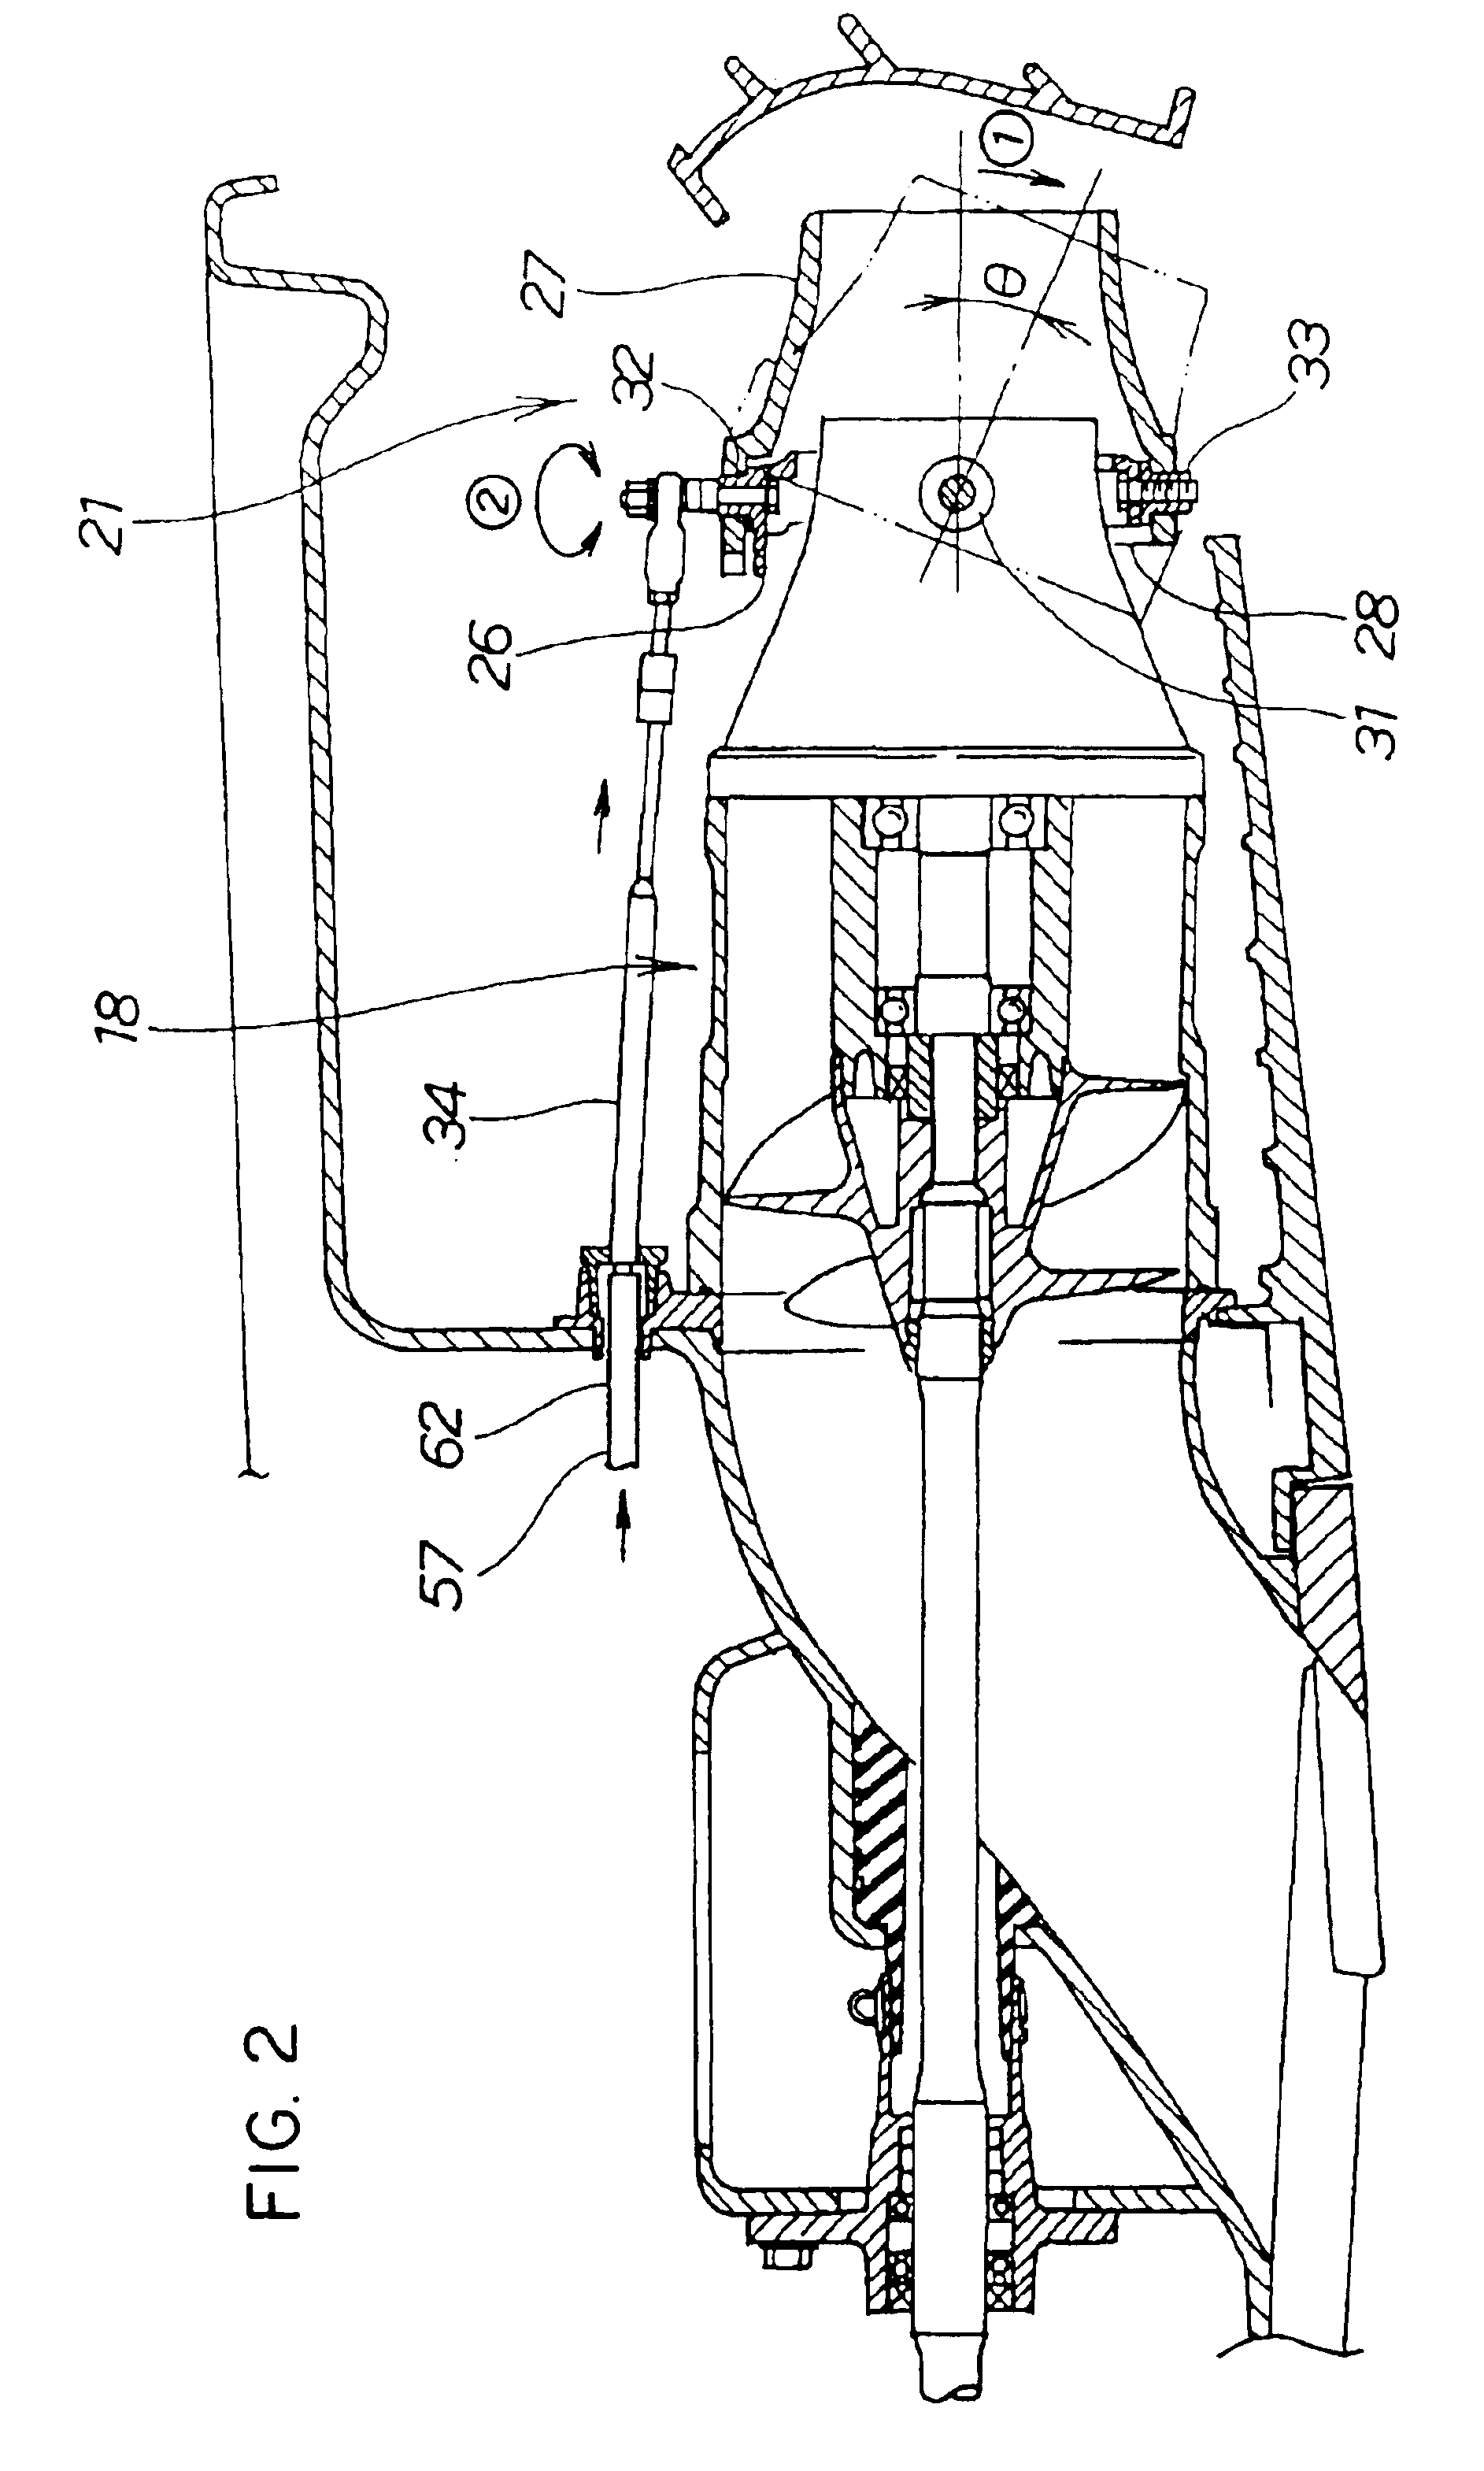 Trim operating lever device for personal watercraft